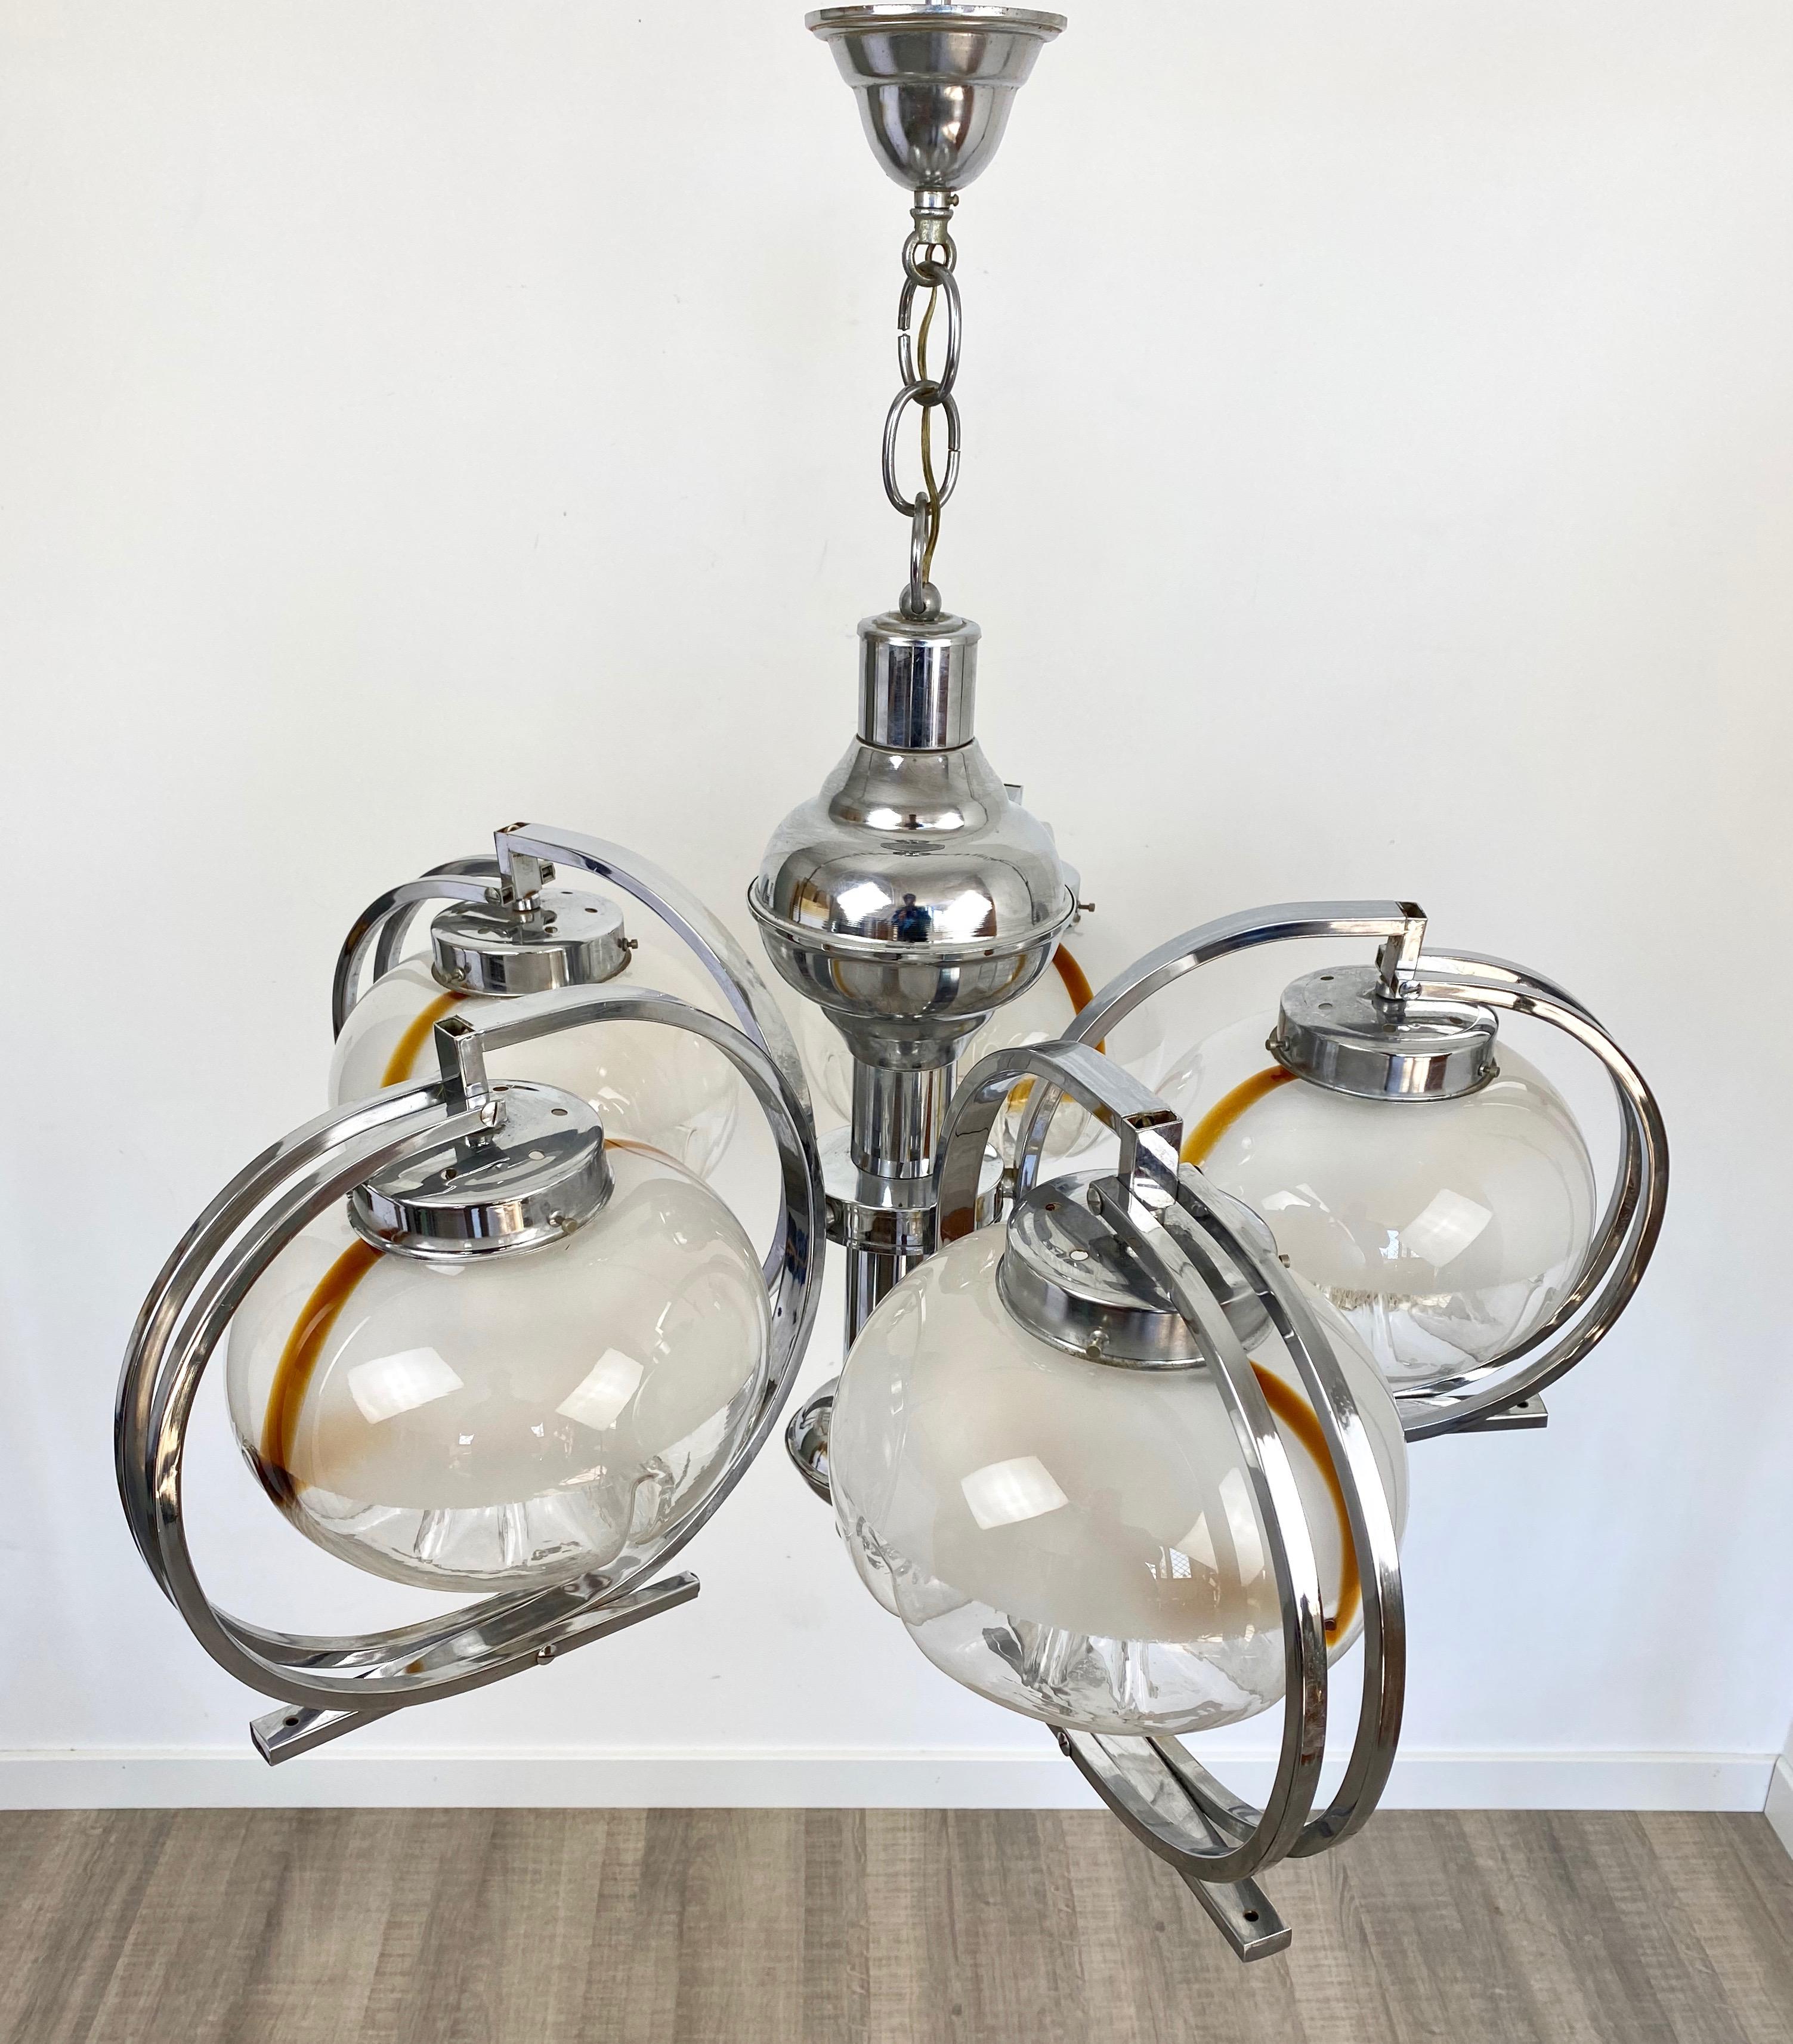 Chandelier pendant in a chrome structure and five Murano glass balls that embellish the light bulbs. Made by the Italian Mazzega, circa 1970.